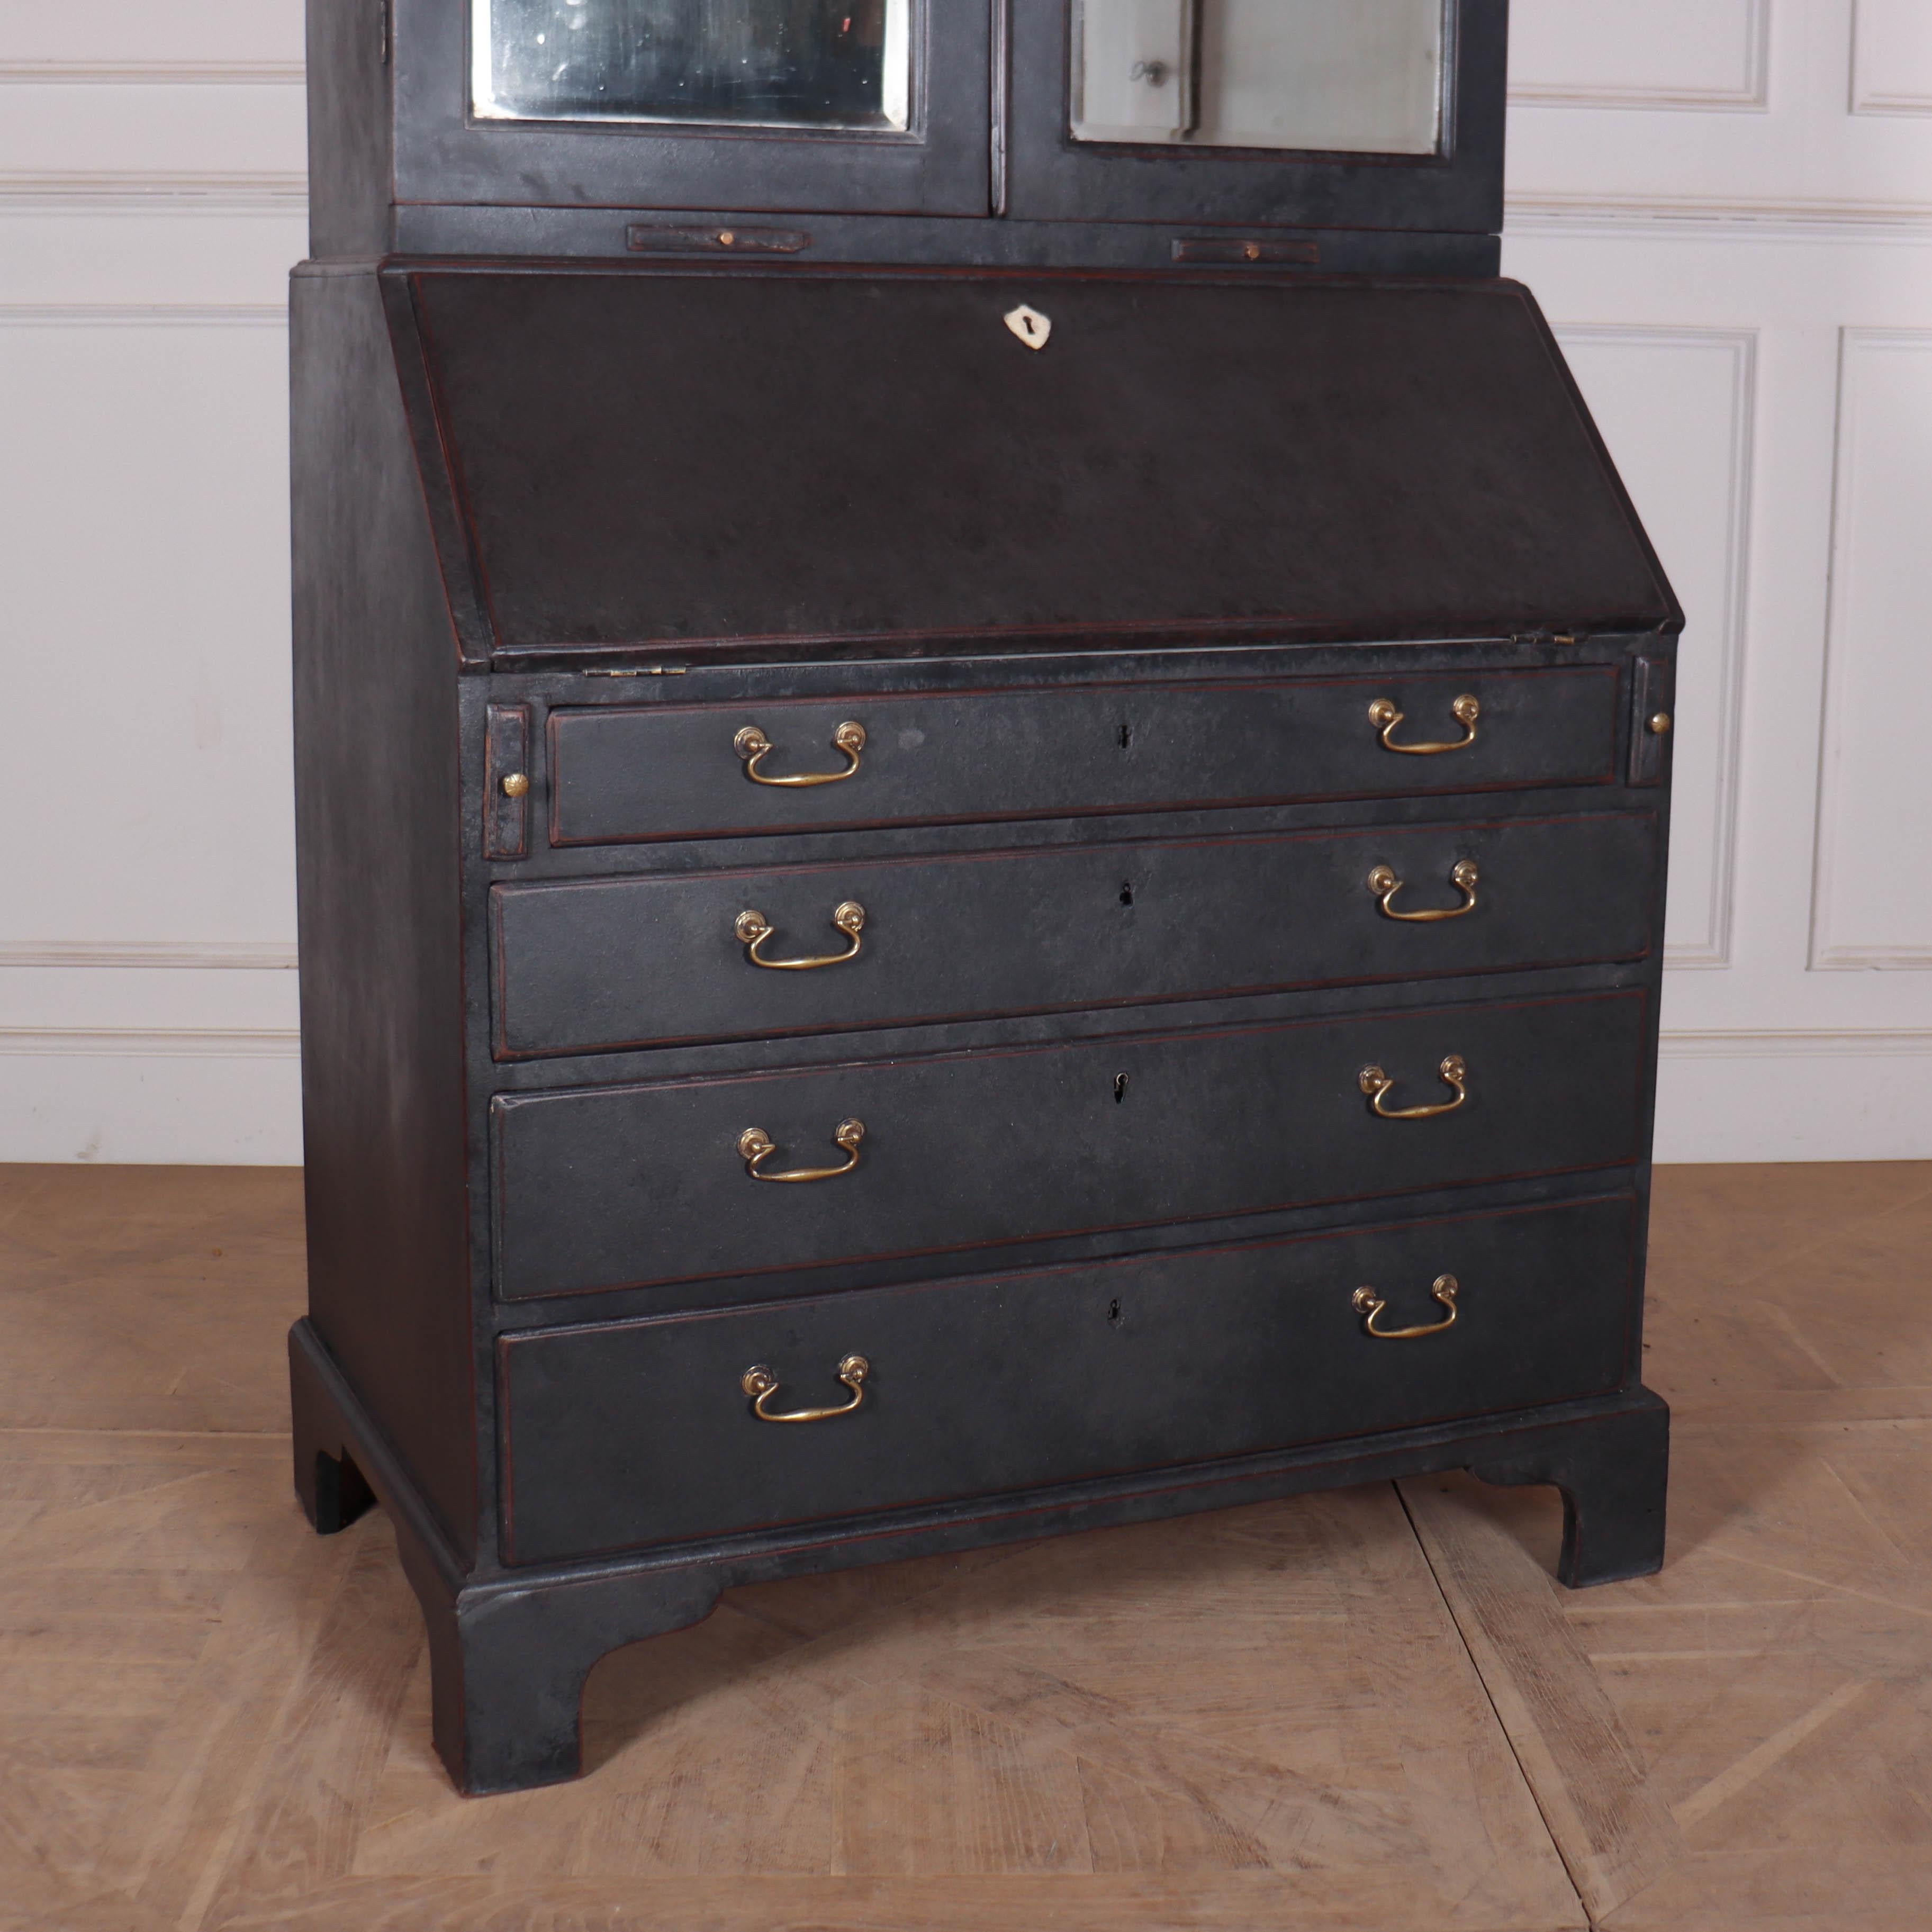 18th C English painted oak bureau bookcase with a mirrrored top. 1770.

Height to desk is 30.5